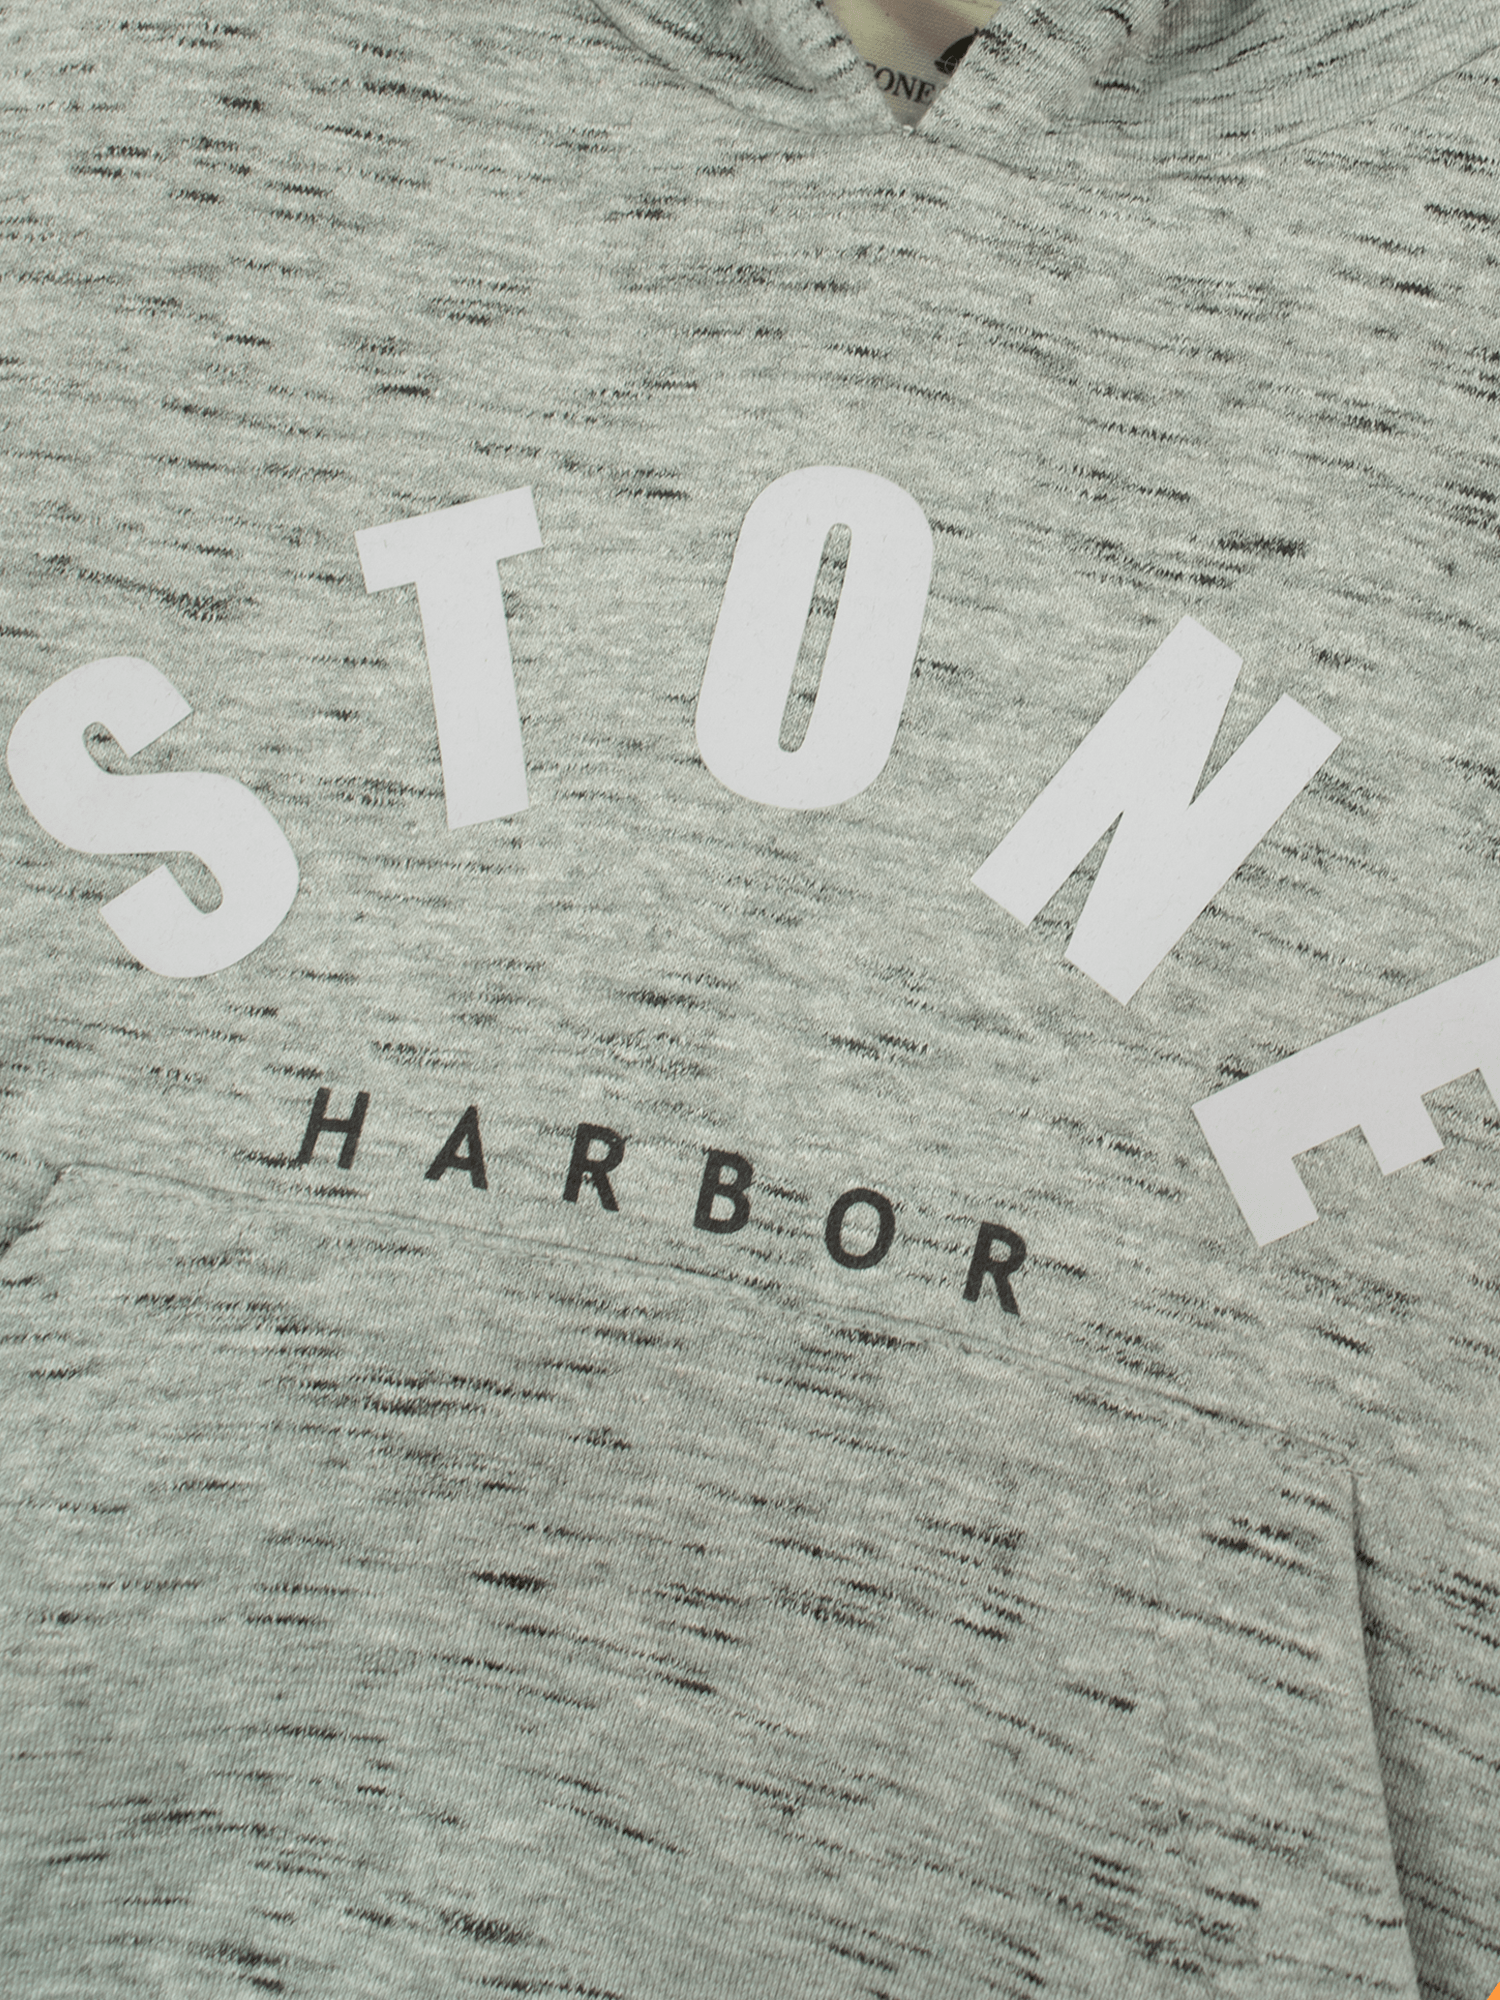 Stone Harbor BOY'S LIMITED EDITION PULLOVER HOODIE